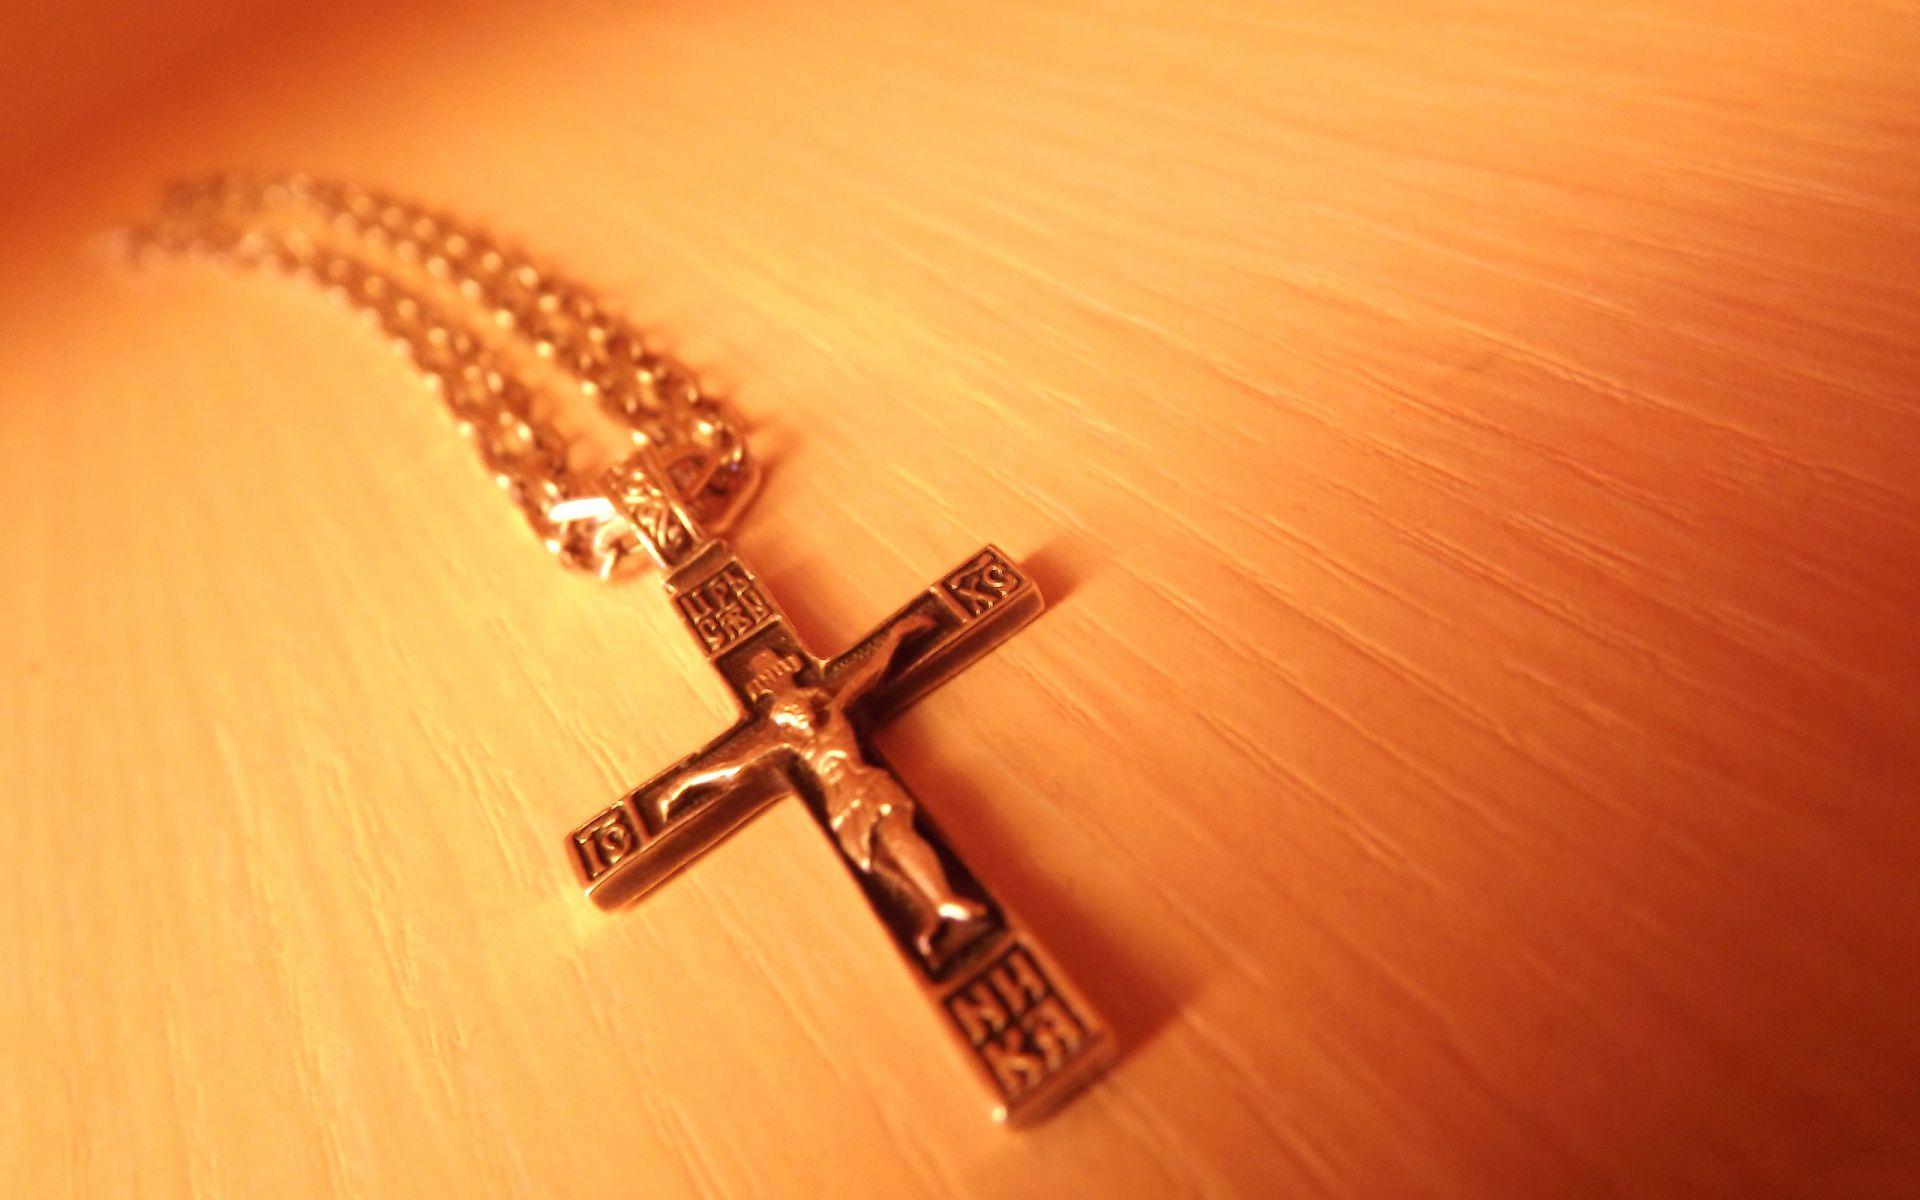 holy cross HD wallpaper and image (3) Wallpaper HD- Download